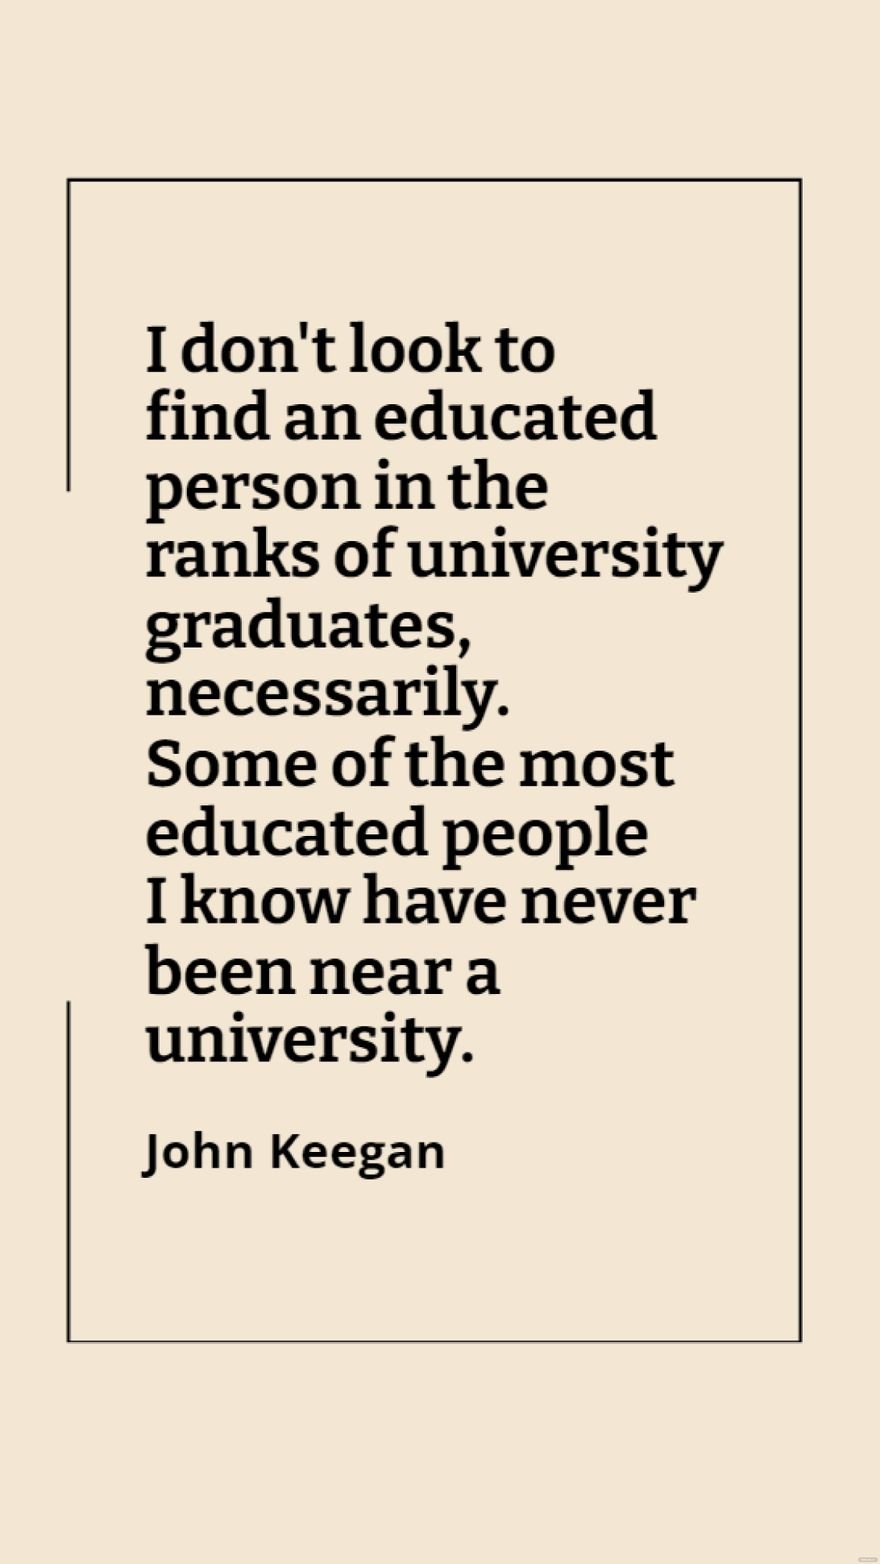 John Keegan - I don't look to find an educated person in the ranks of university graduates, necessarily. Some of the most educated people I know have never been near a university.